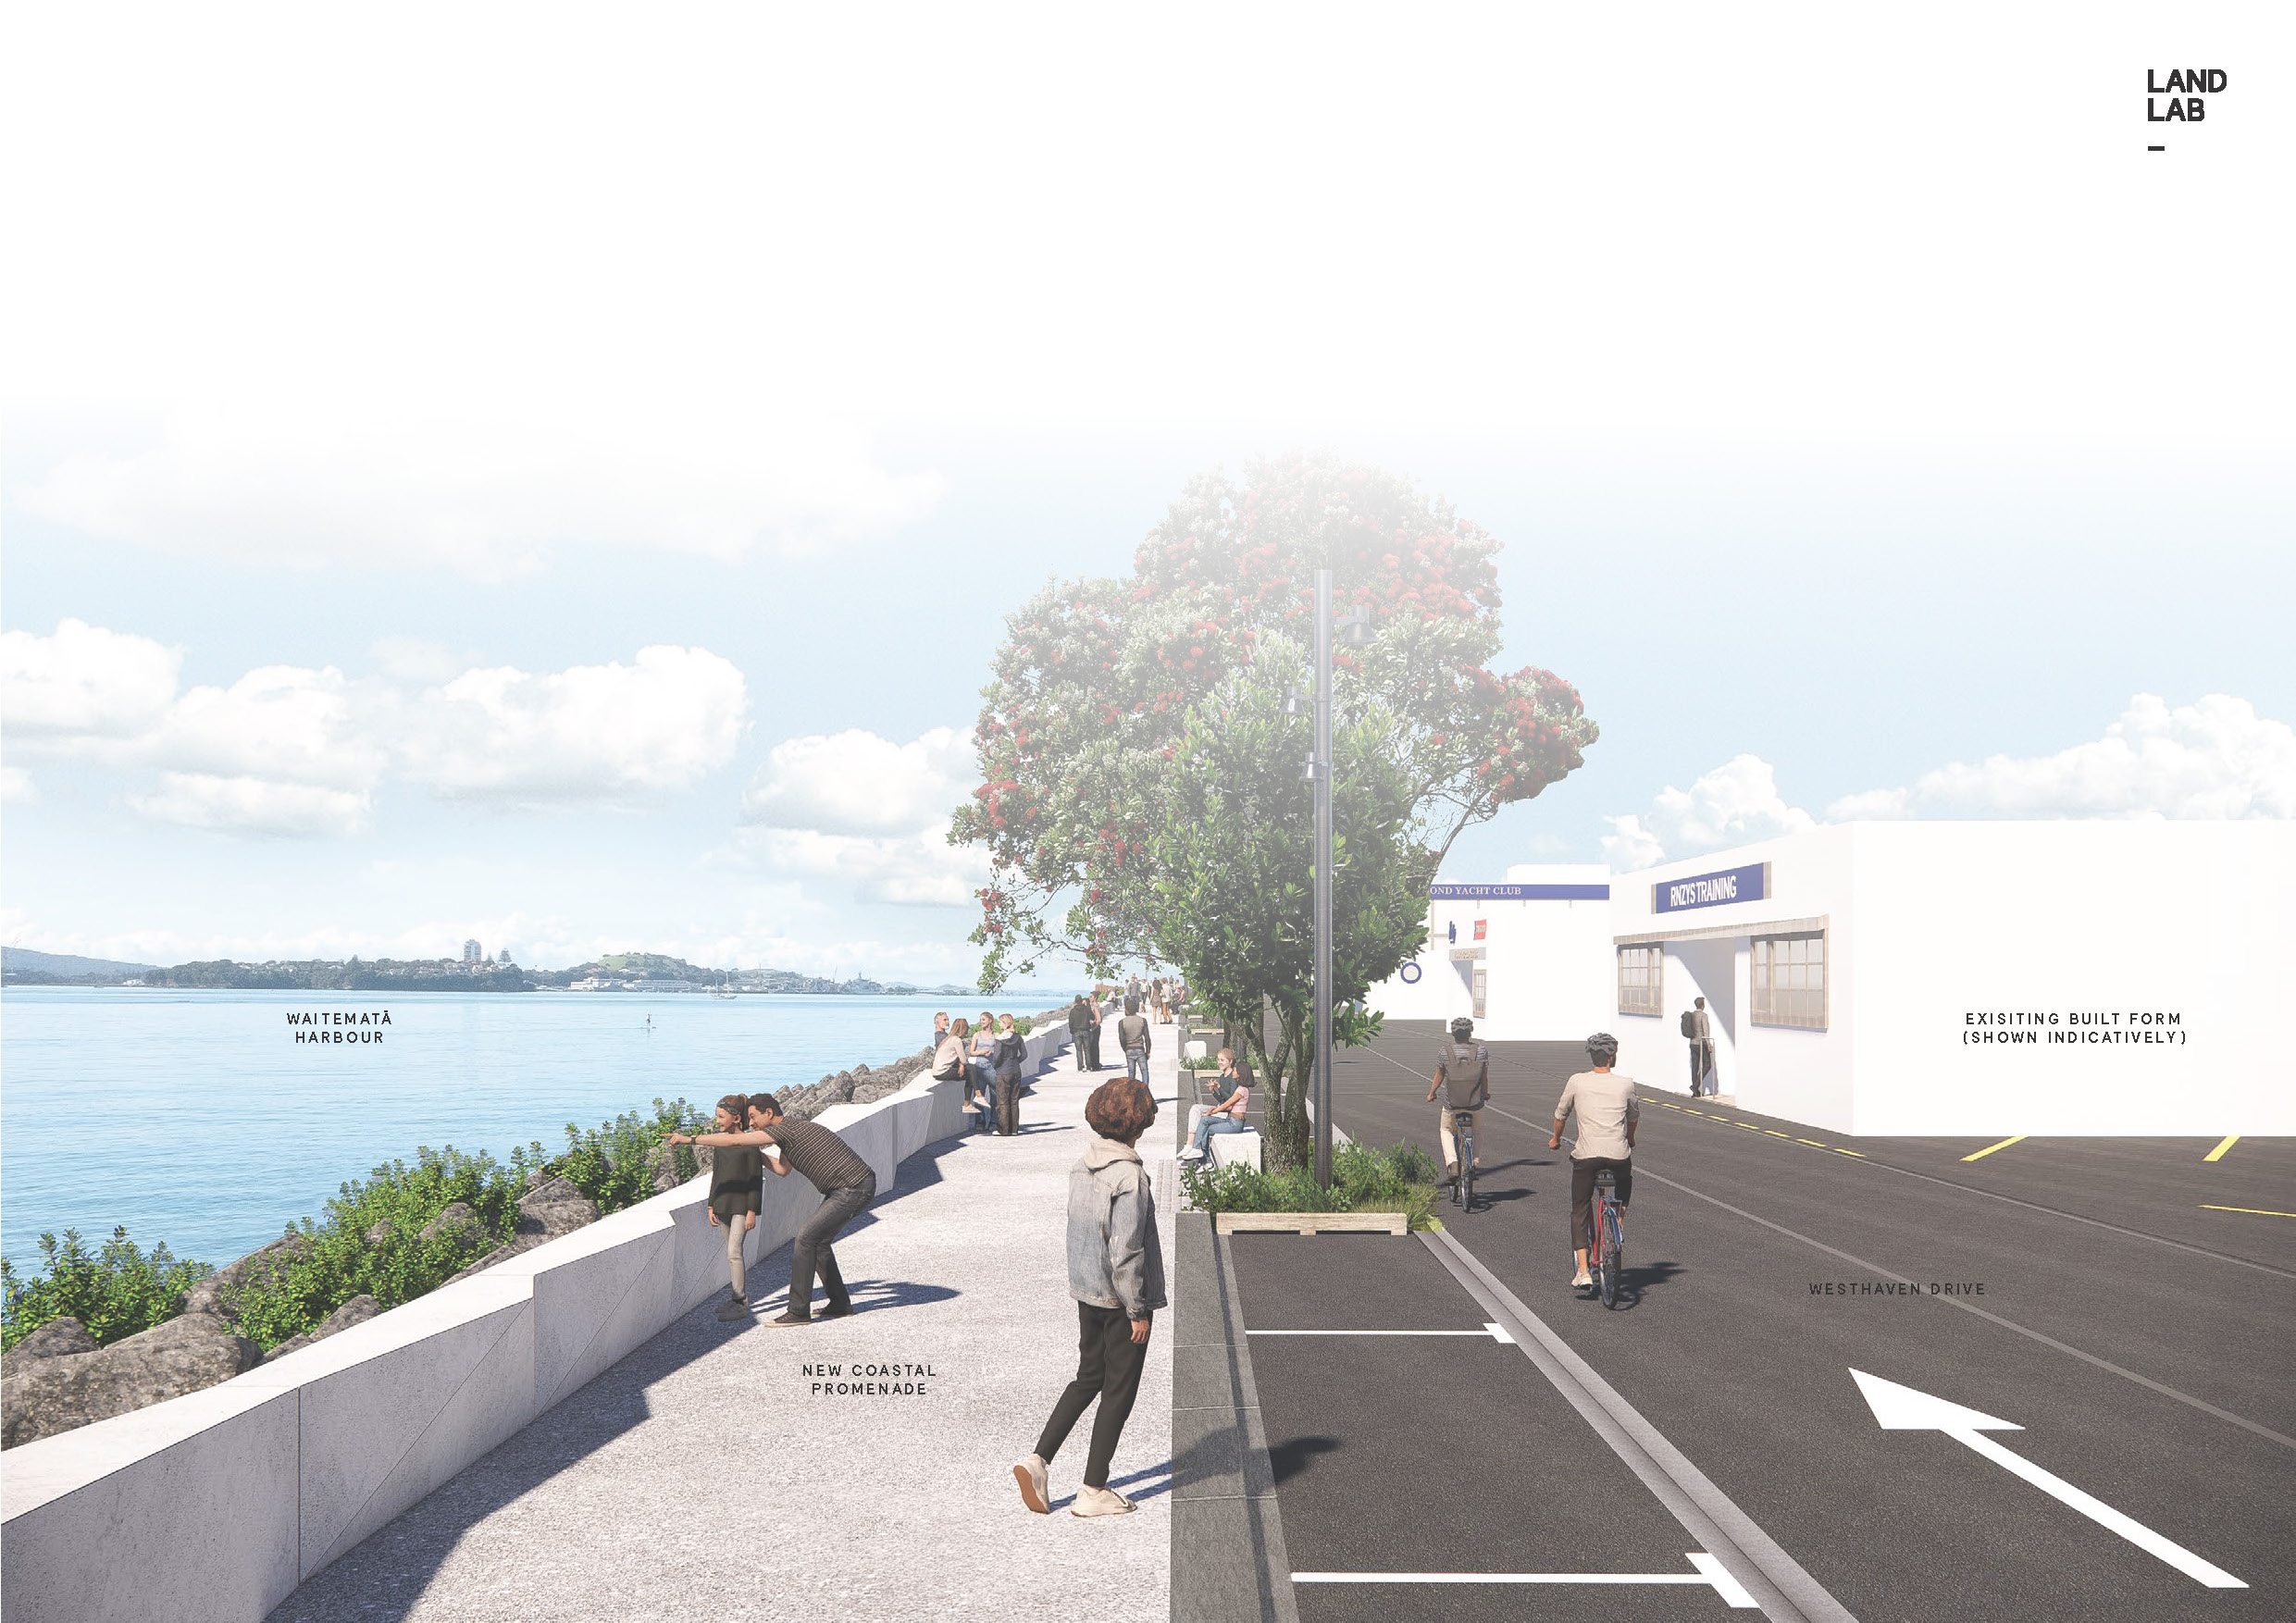 Seawall Images For Public Constitution Render